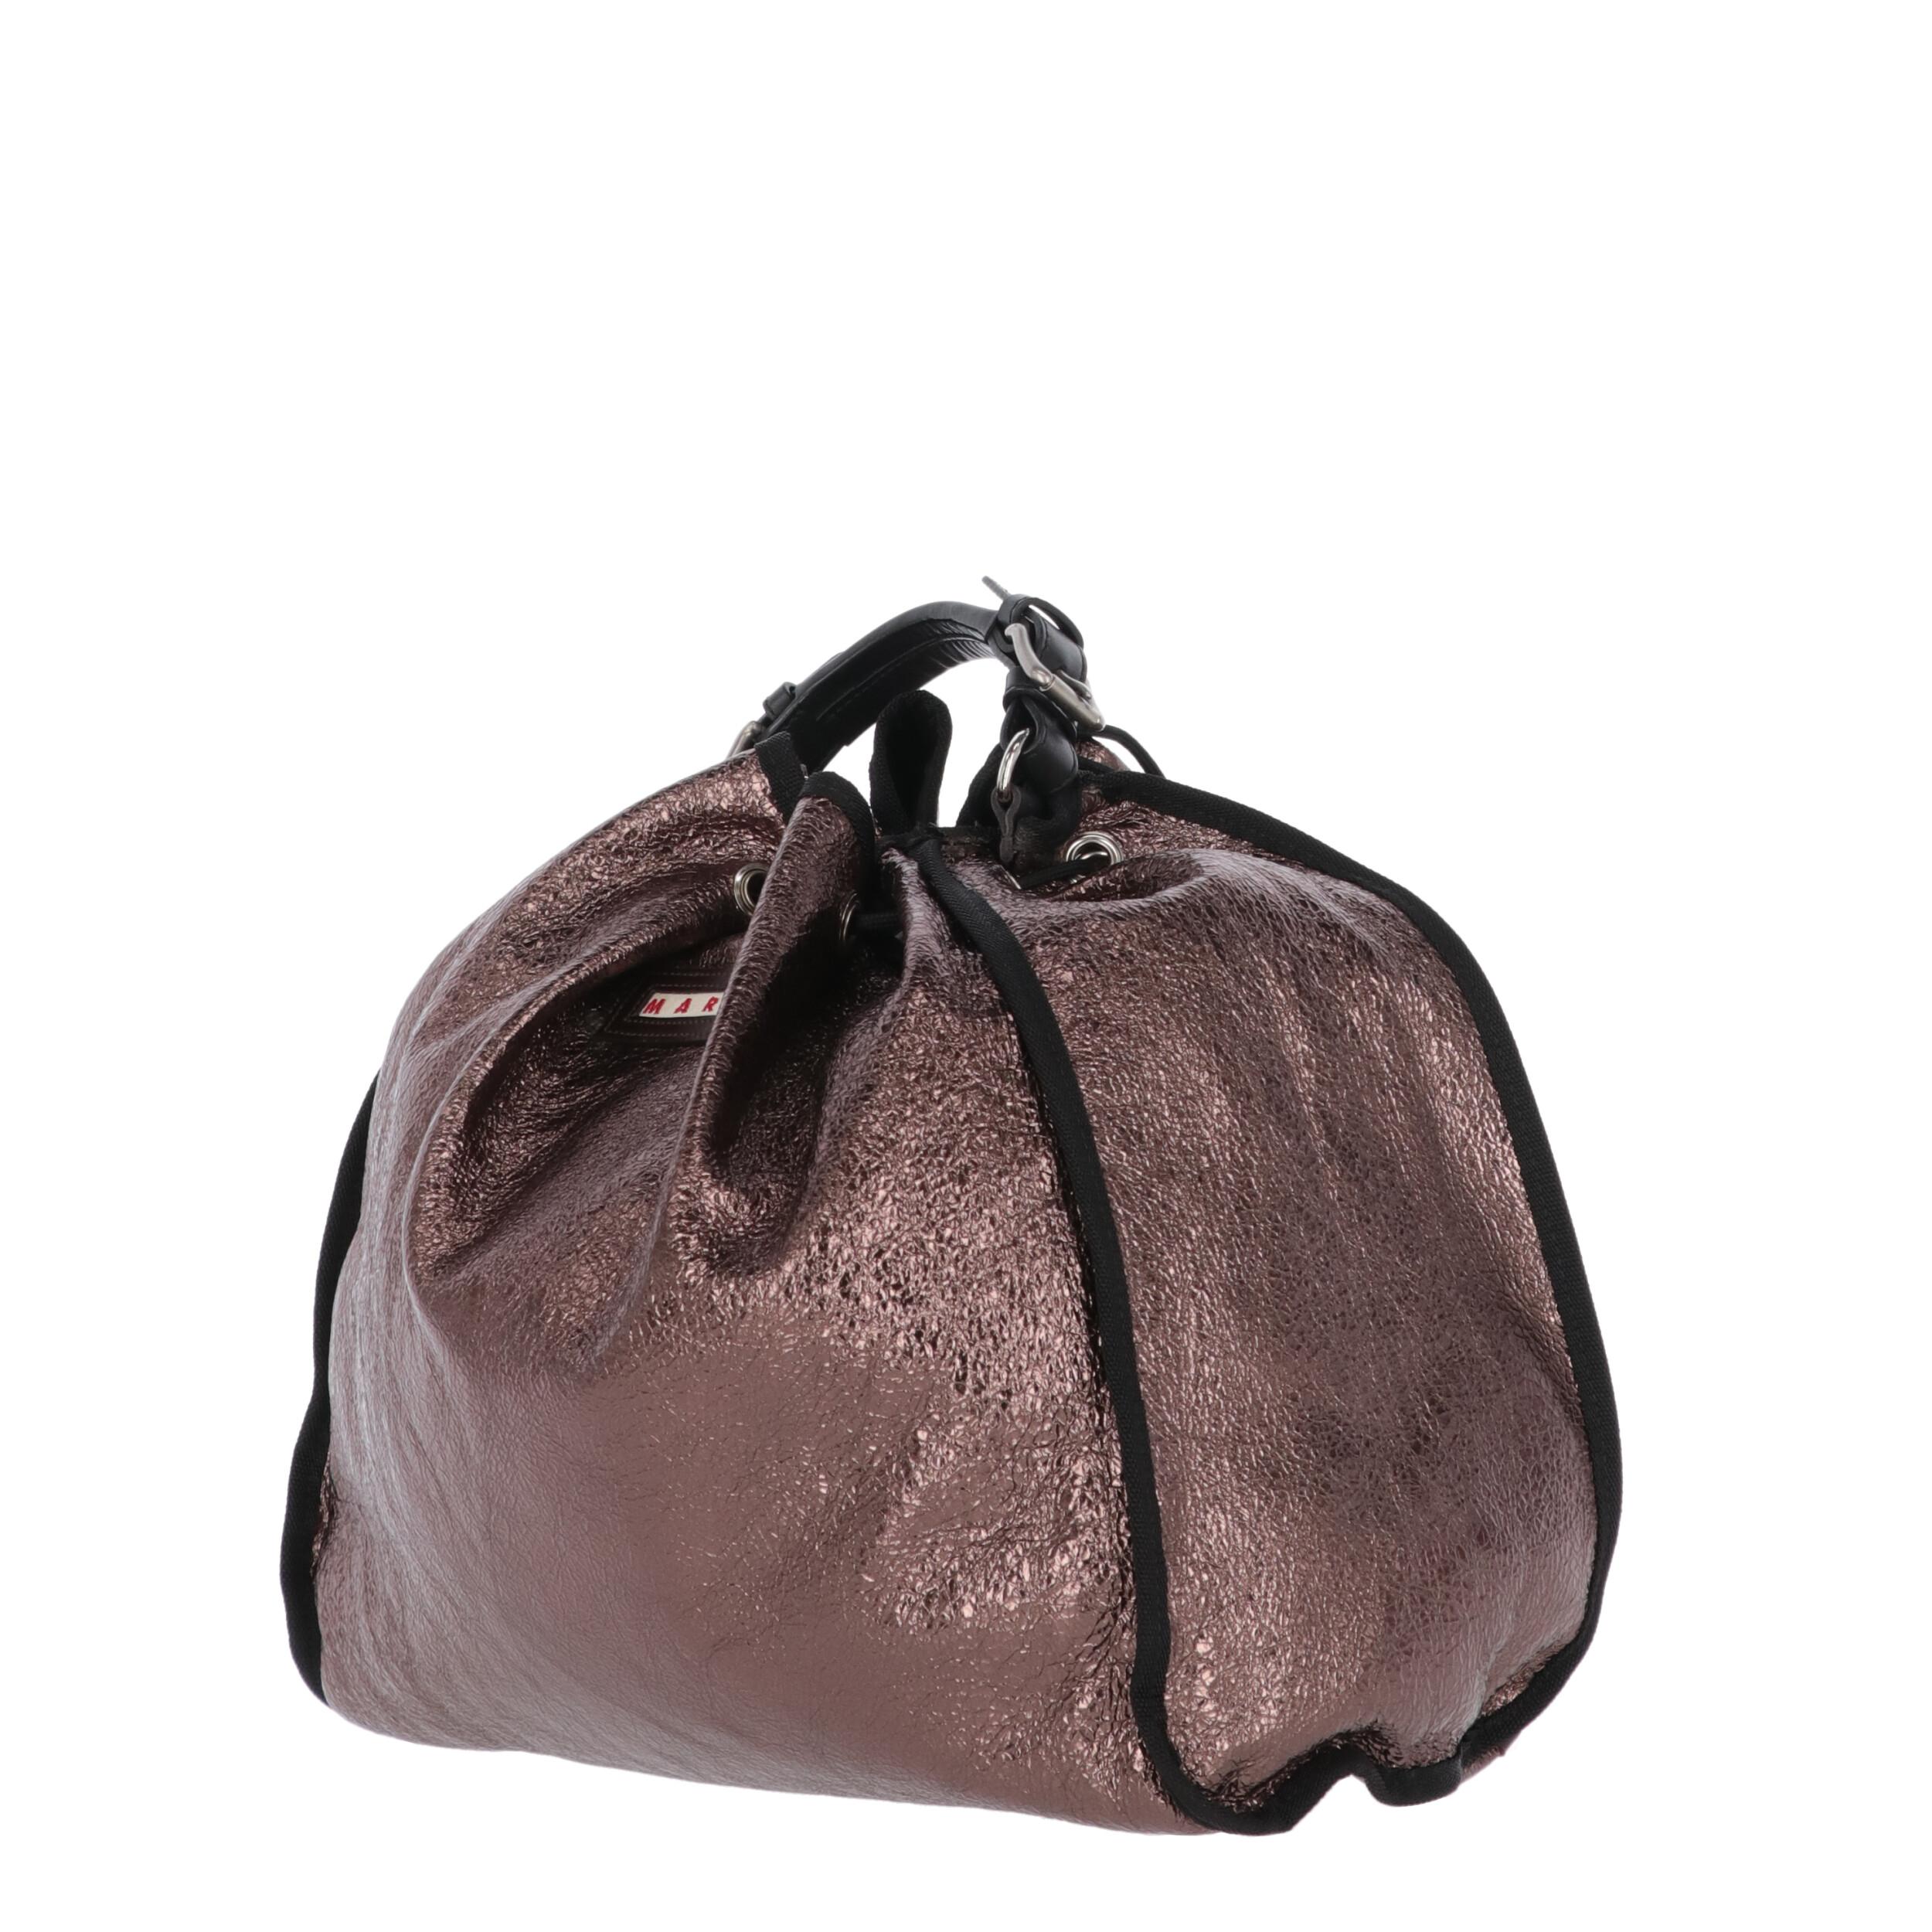 Marni metallic brown leather bucket bag. Two handles, one of which can be removed with a snap hook. Drawstring closure and silver metal details.
Years: 2000s

Made in Italy

Height: 36 cm
Width: 38 cm
Depth: 18 cm
Length shoulder strap: 60 cm
